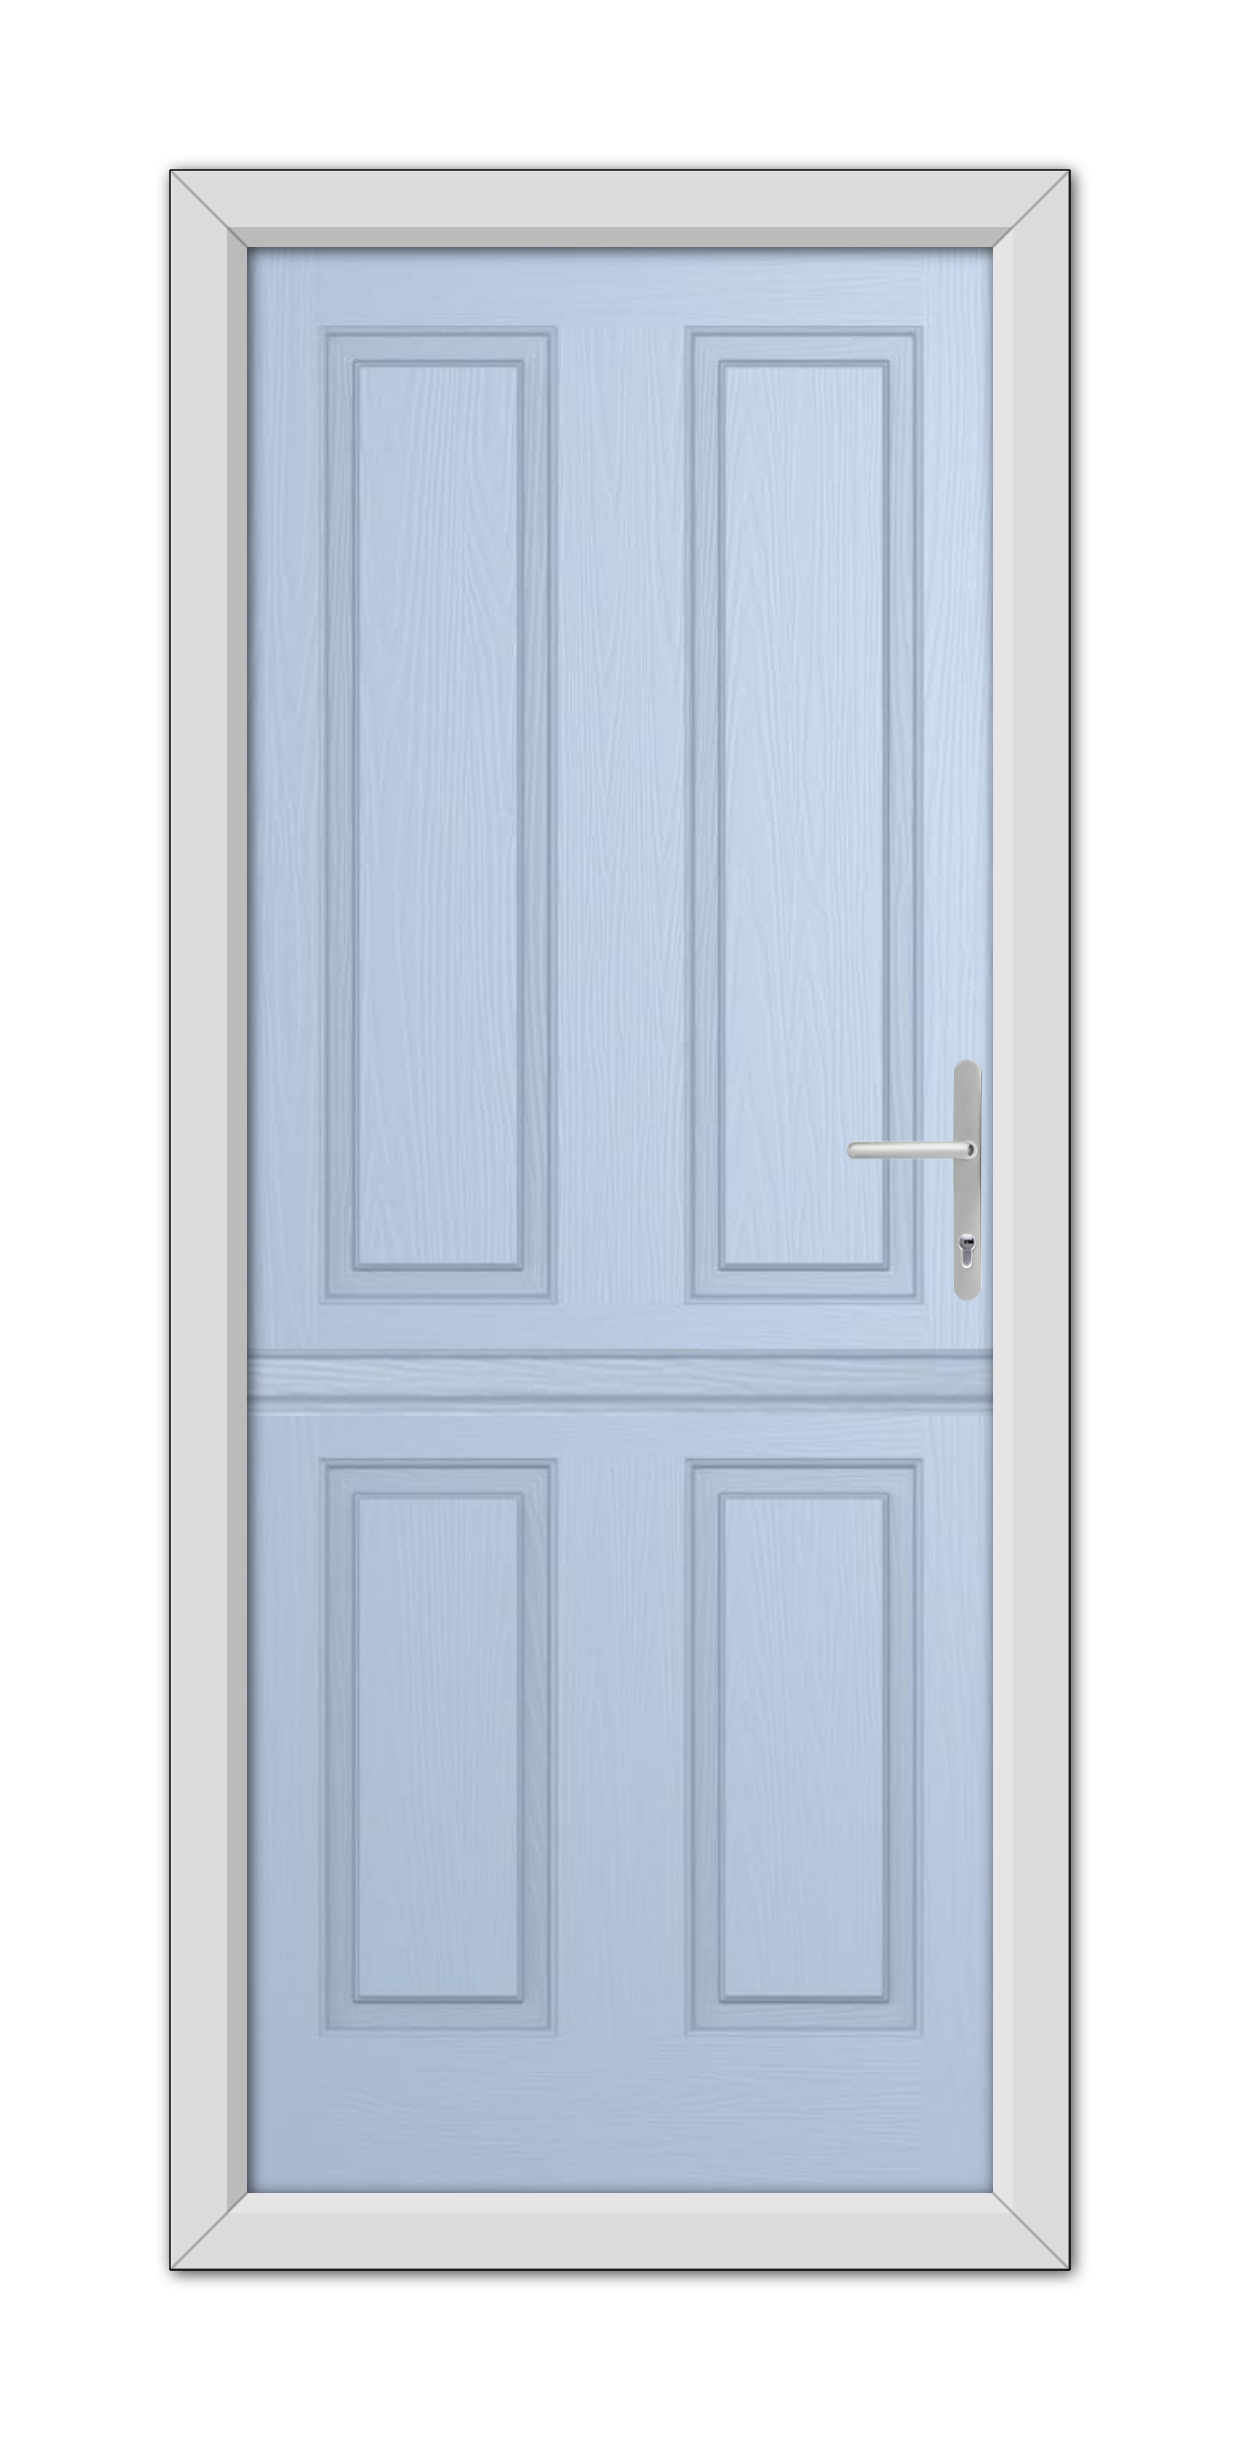 A Duck Egg Blue Whitmore Solid Stable Composite Door 48mm Timber Core with four panels, a silver handle on the right side, and a white frame, isolated on a white background.